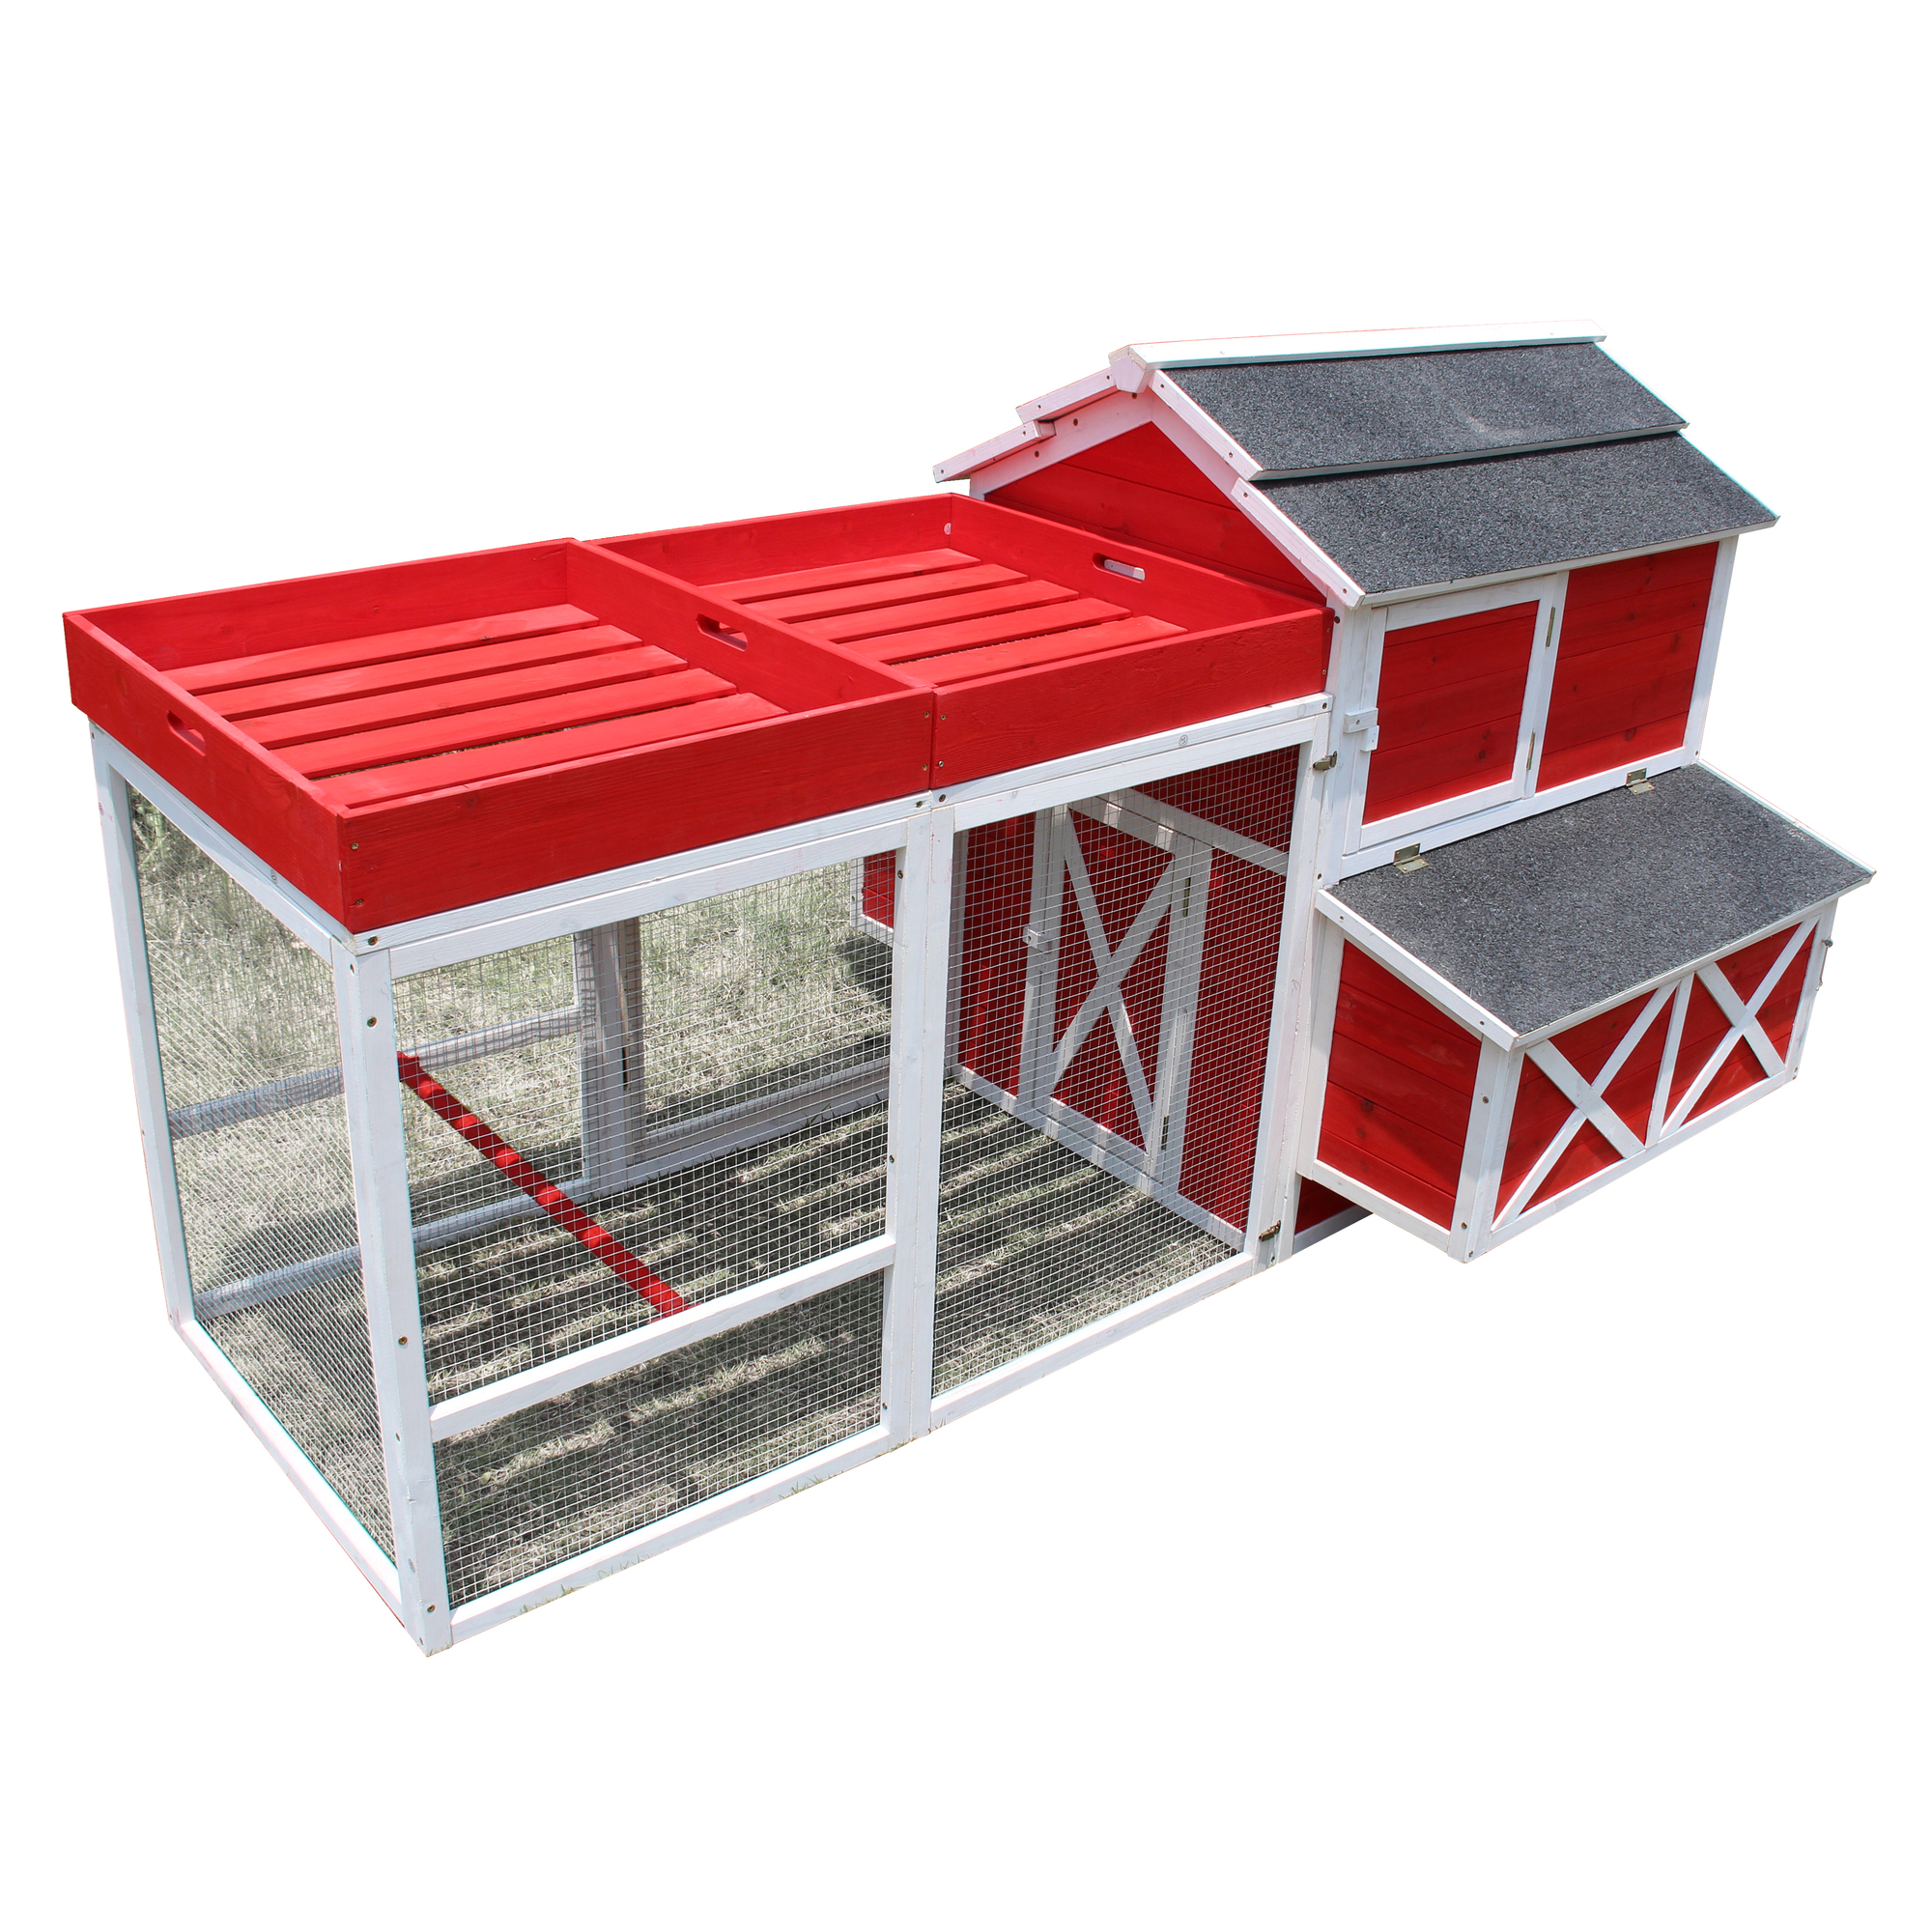 Merry Products, Red Barn Chicken Coop with Roof Top Planter, Model PTH0310010401